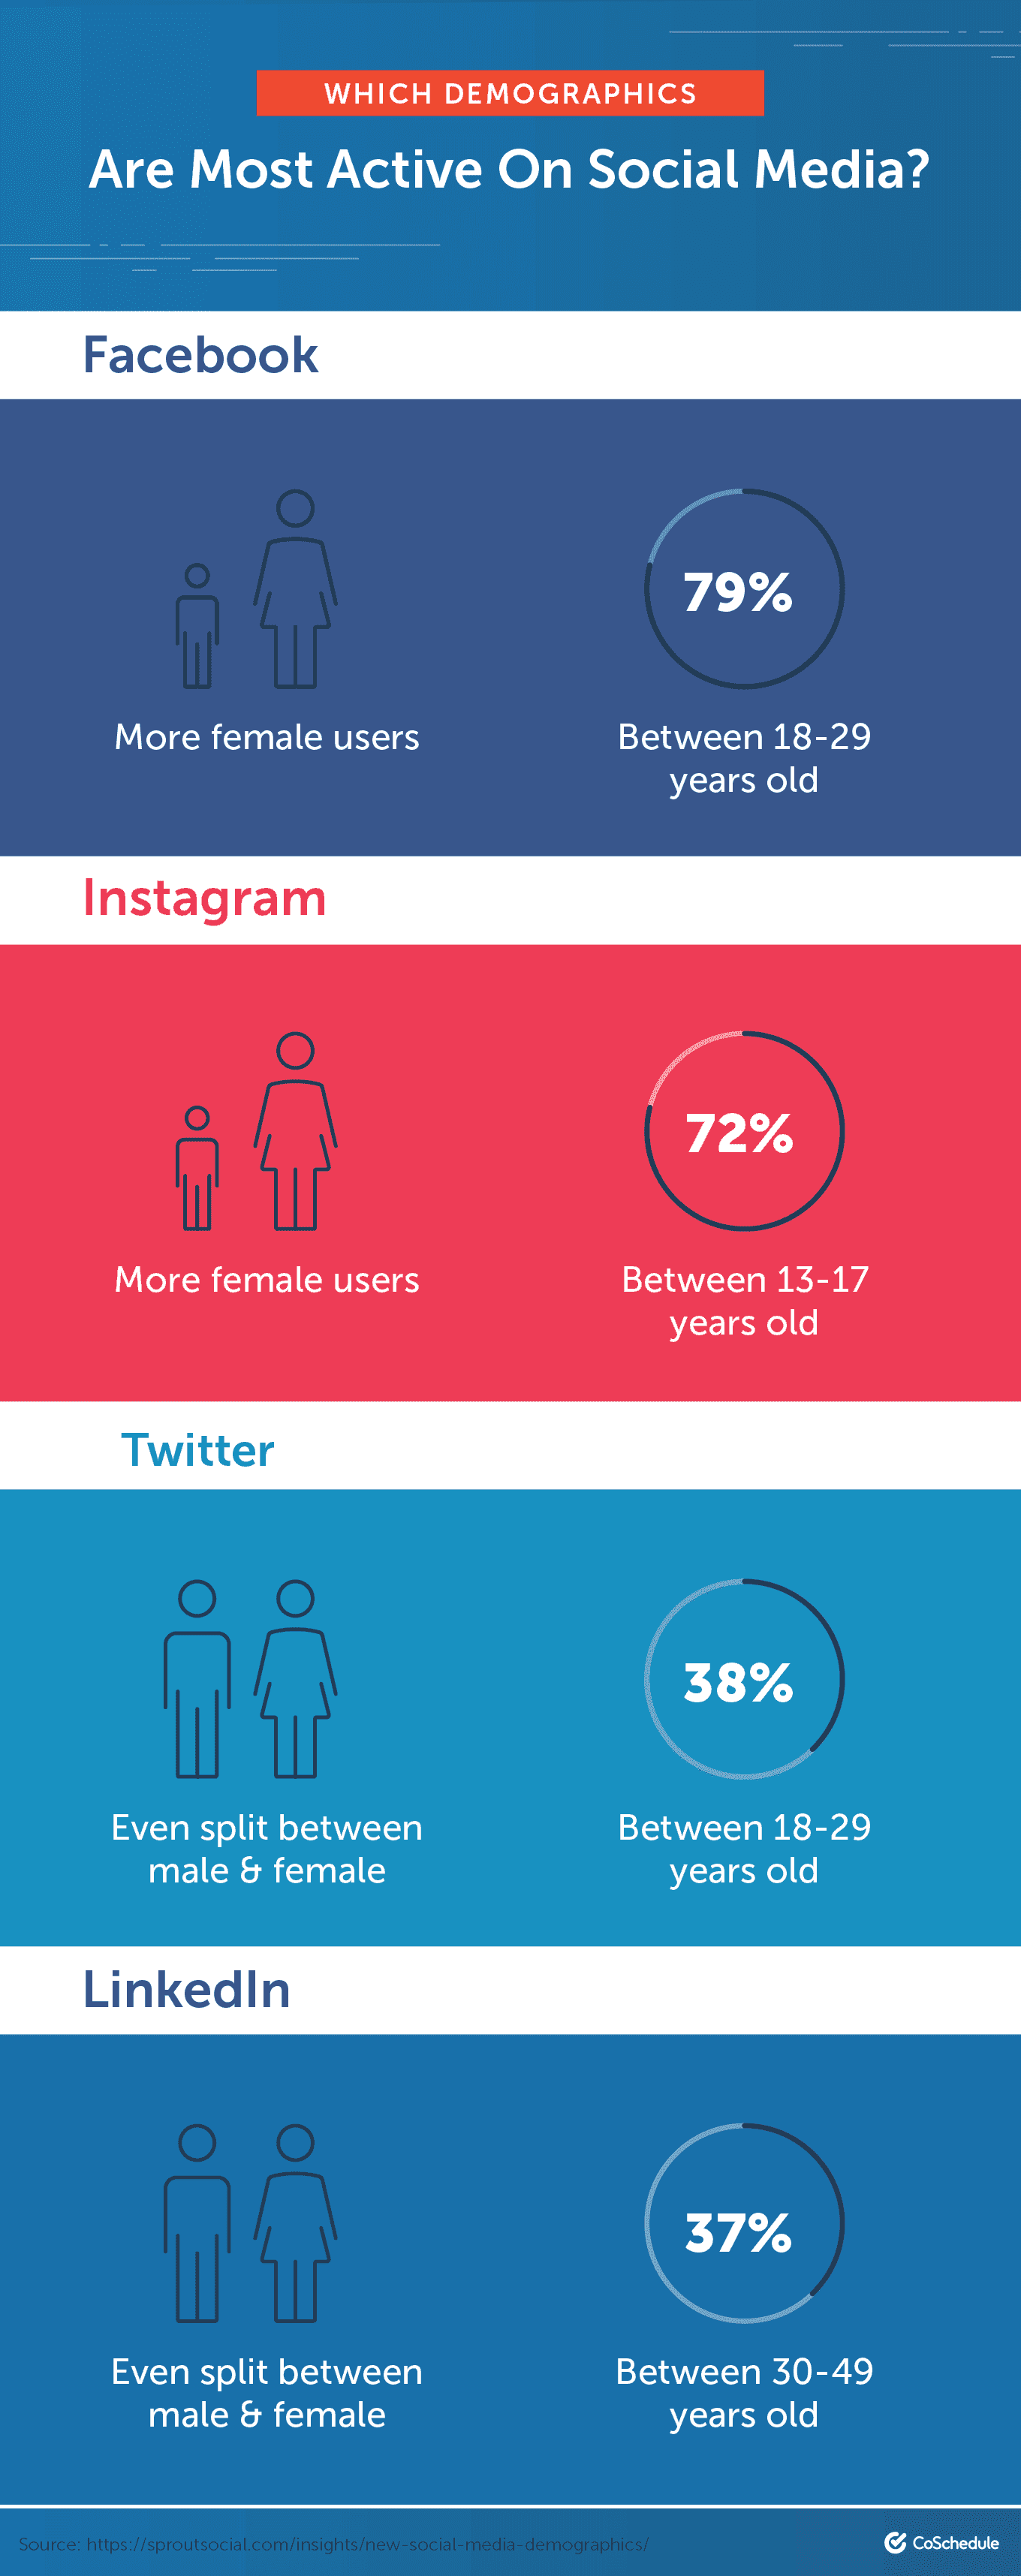 Which Demographics Are Most Active on Social Media?